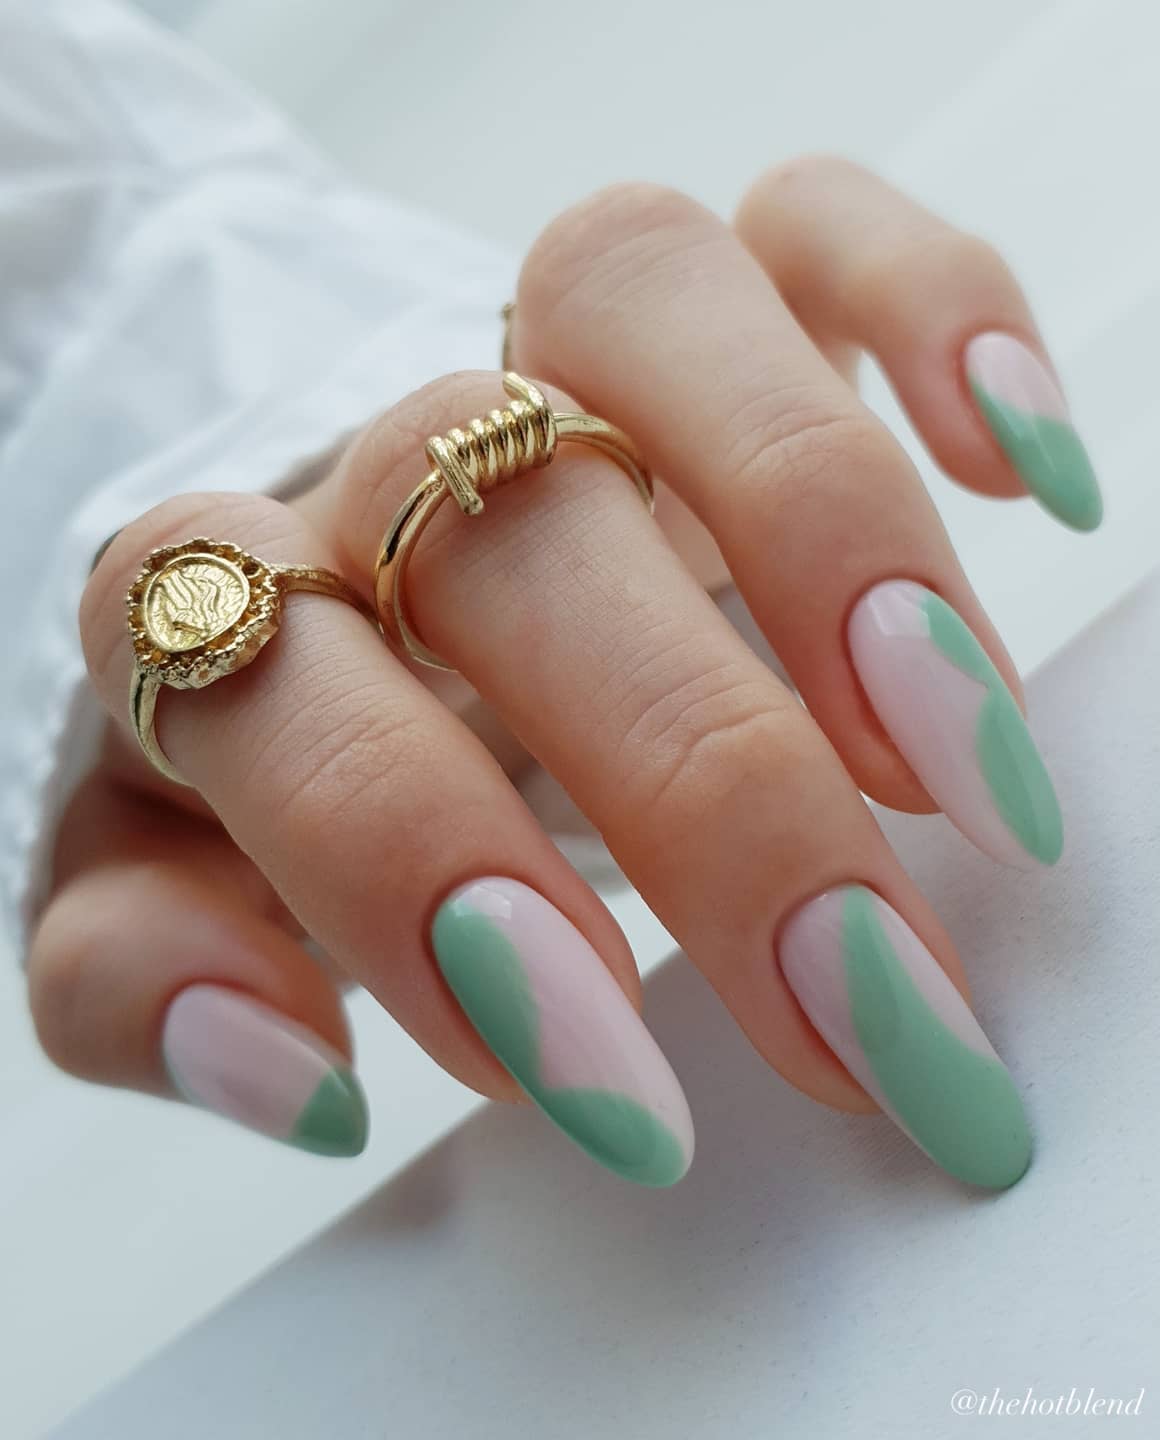 A hand with long almond nails painted a milky white with dark mint green abstract accents